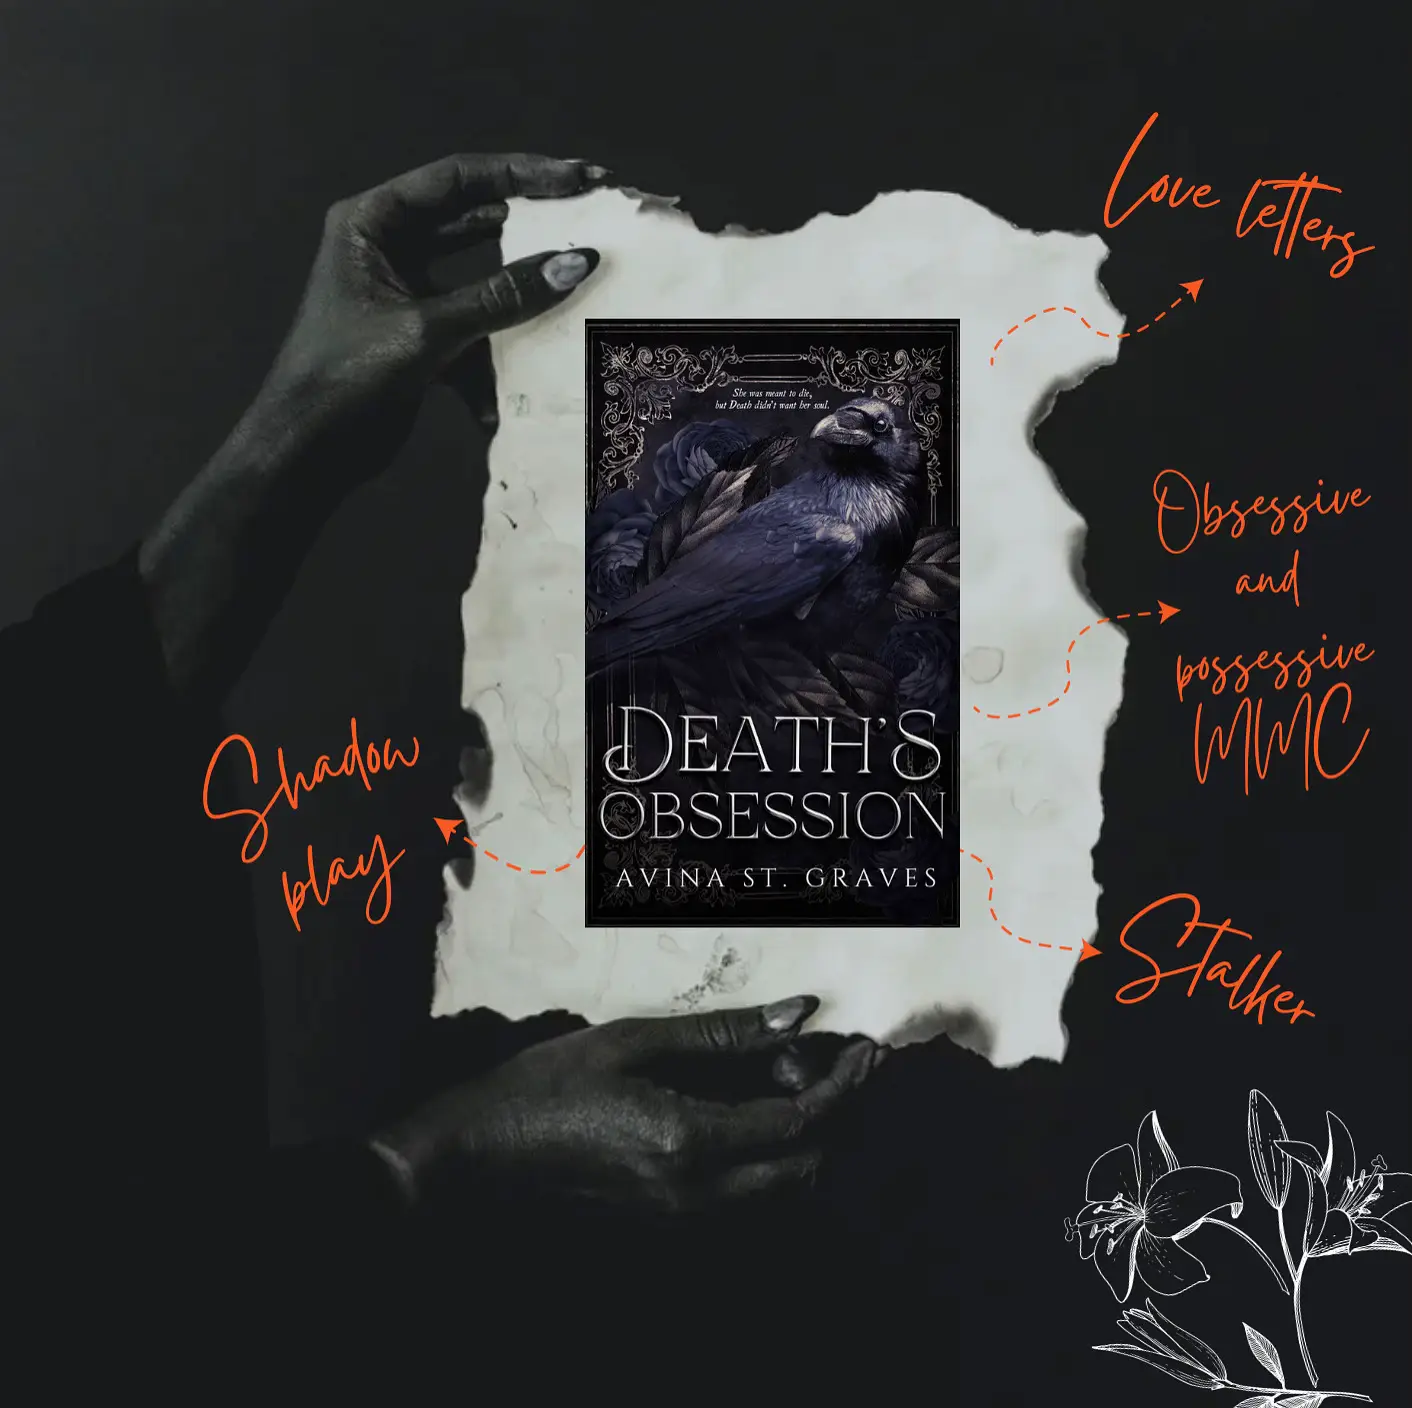 Death's Obsession by Avina St. Graves, Gallery posted by abookishbmw